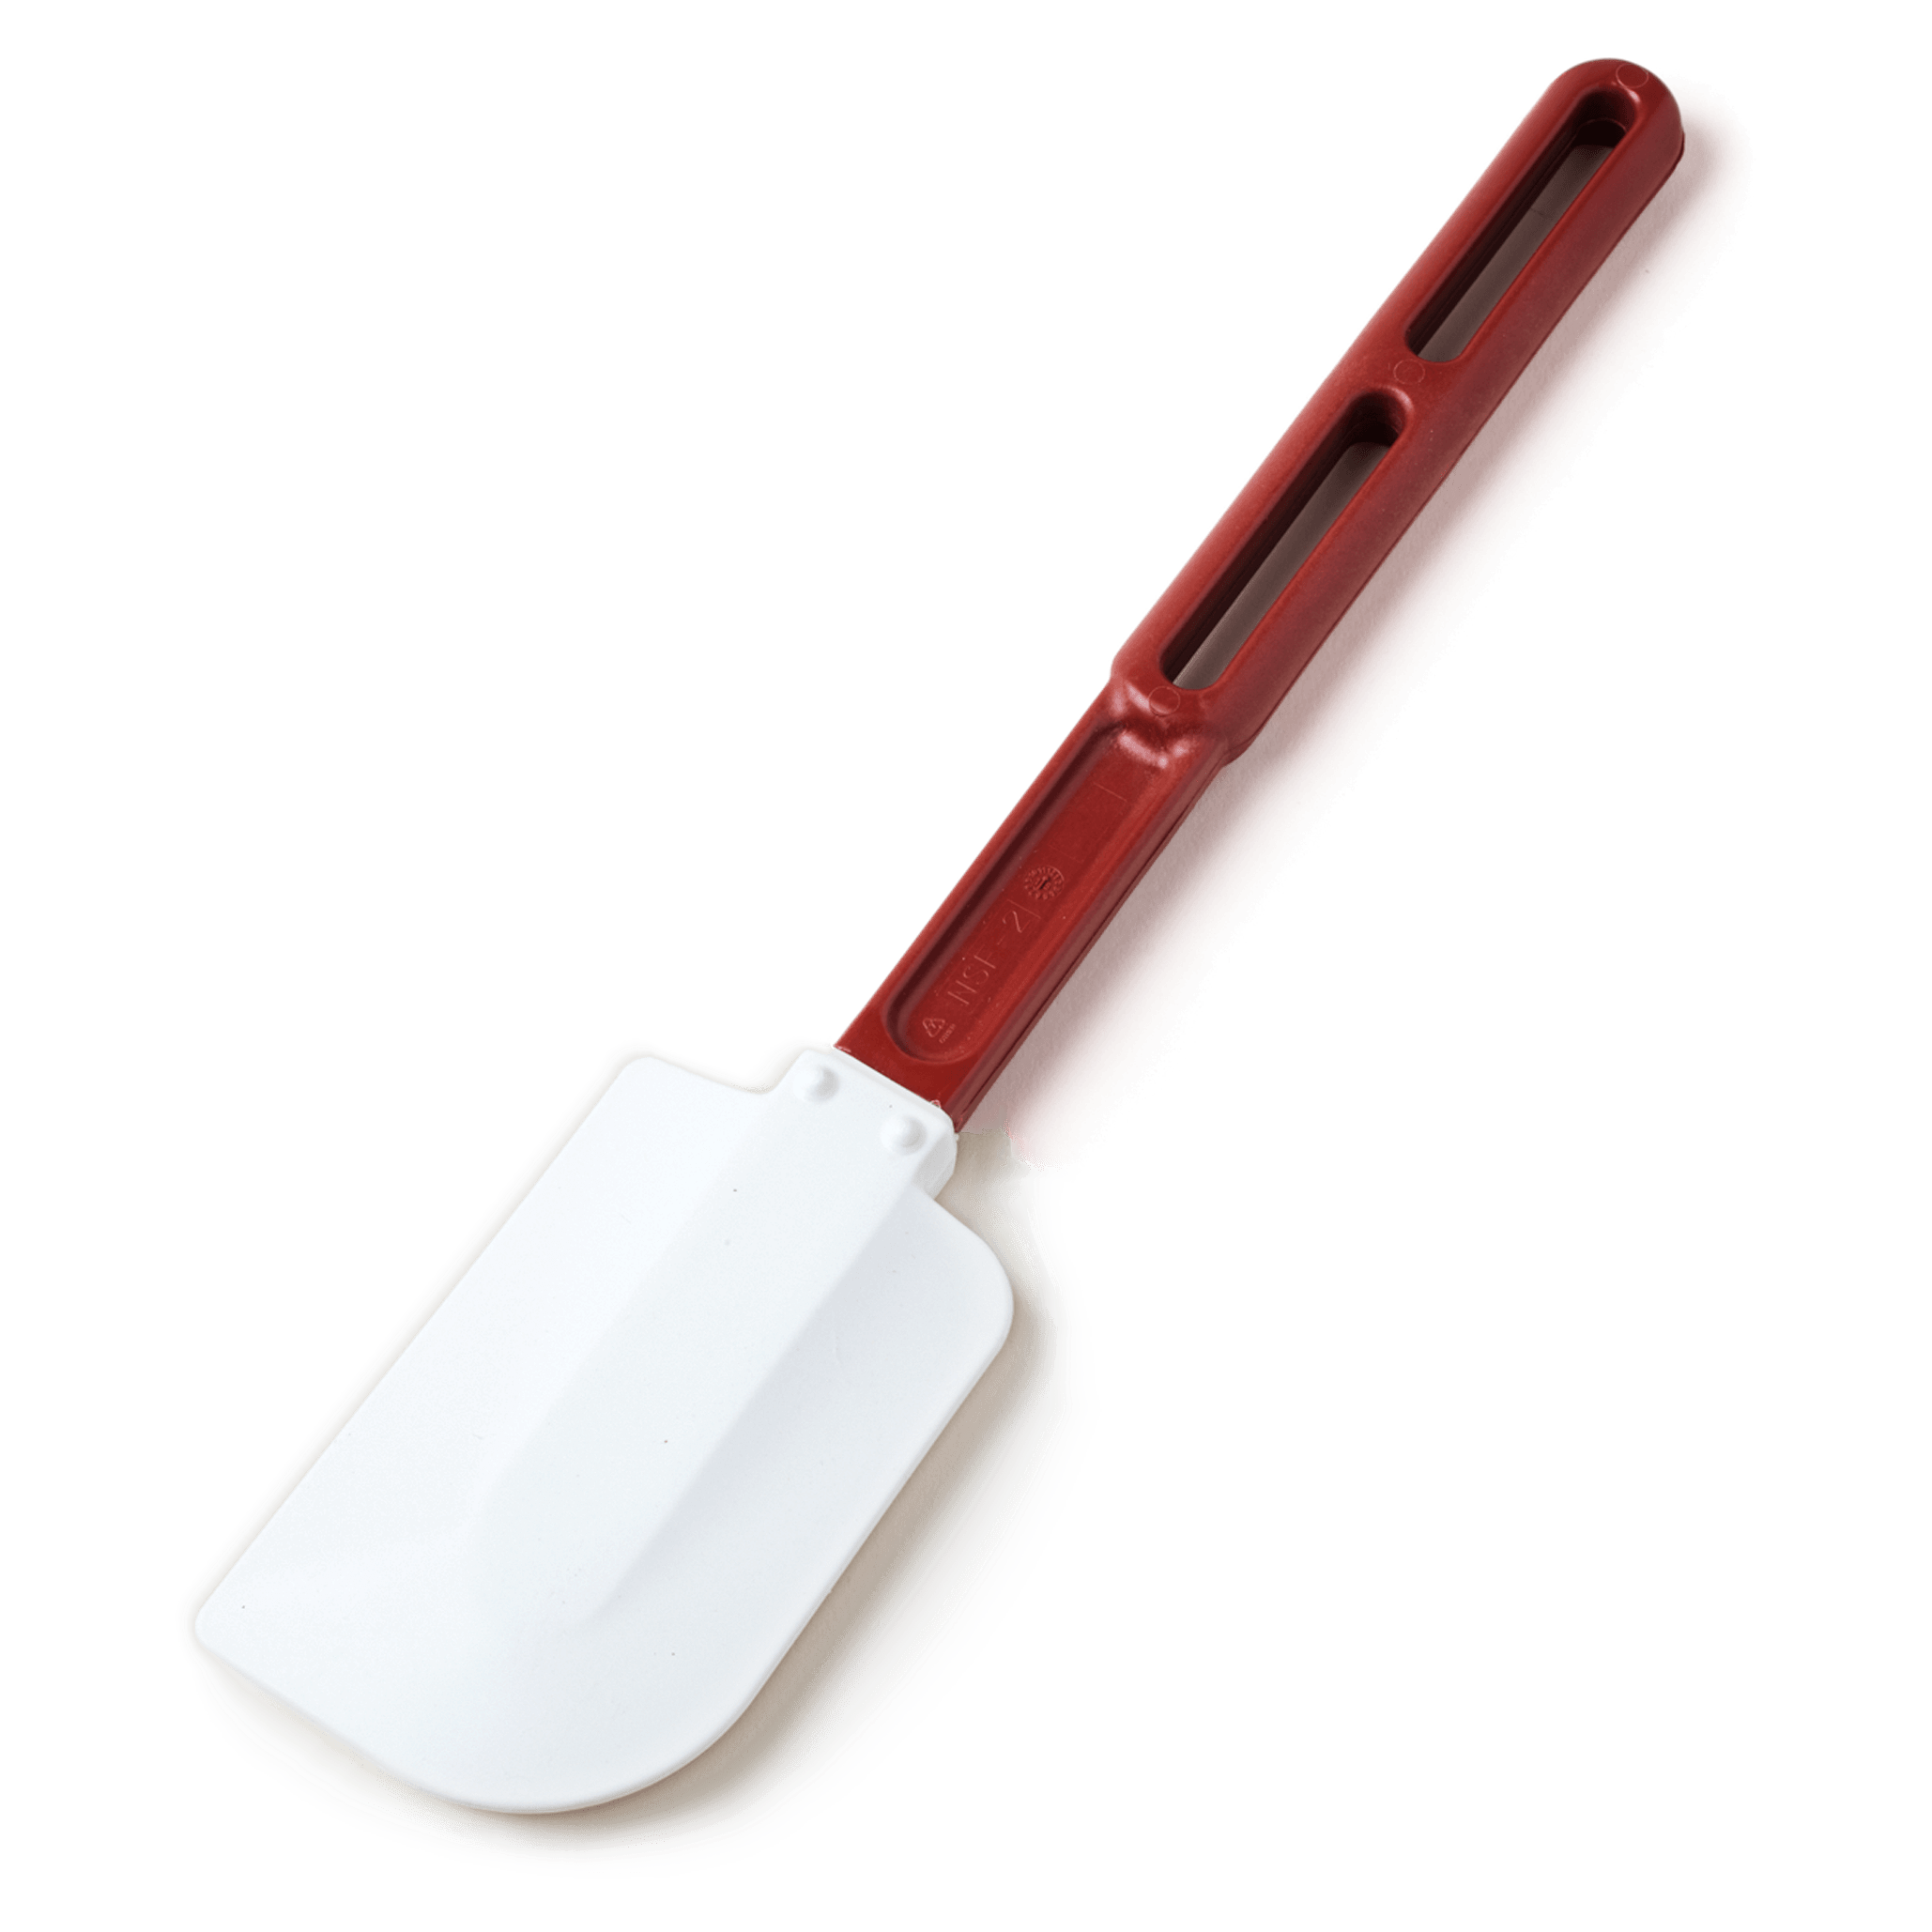 https://res.cloudinary.com/hksqkdlah/image/upload/33798_sil-siliconespatulas-vollrathnsfcertifiedhightemperature-25.png